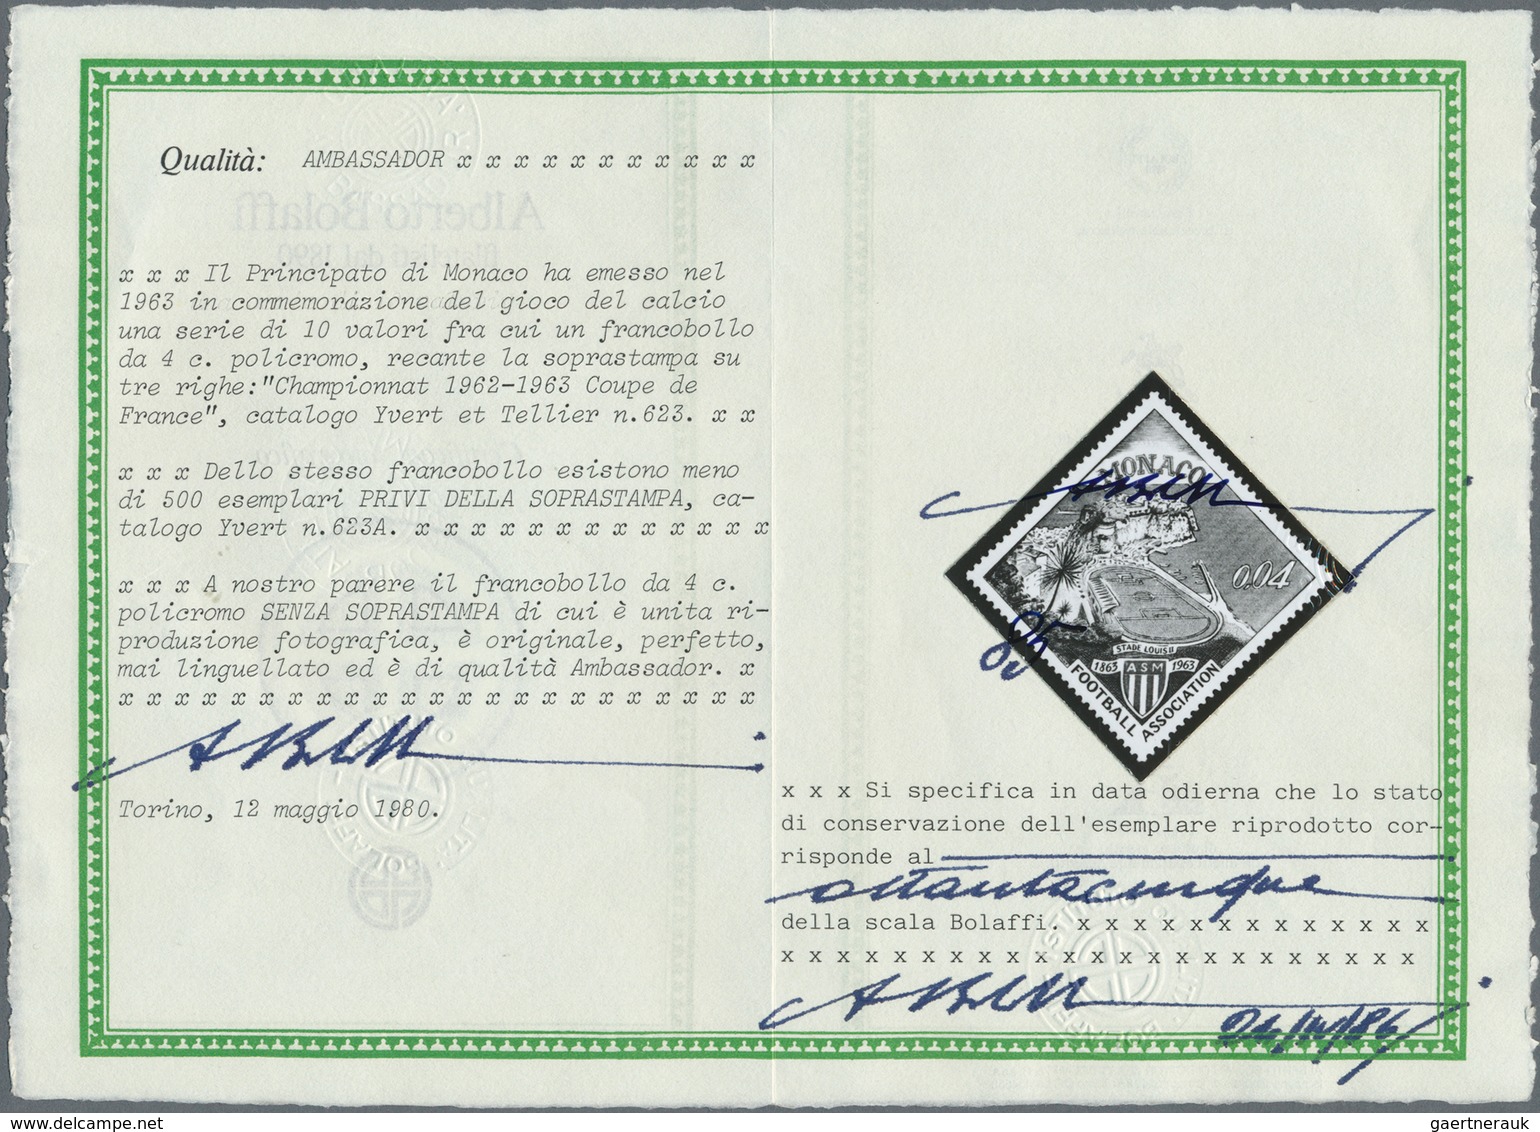 01547 Monaco: 1963, French Champion "AS Monaco", 0.04fr. Without Surcharge, Not Issued, Unmounted Mint, Ce - Ongebruikt